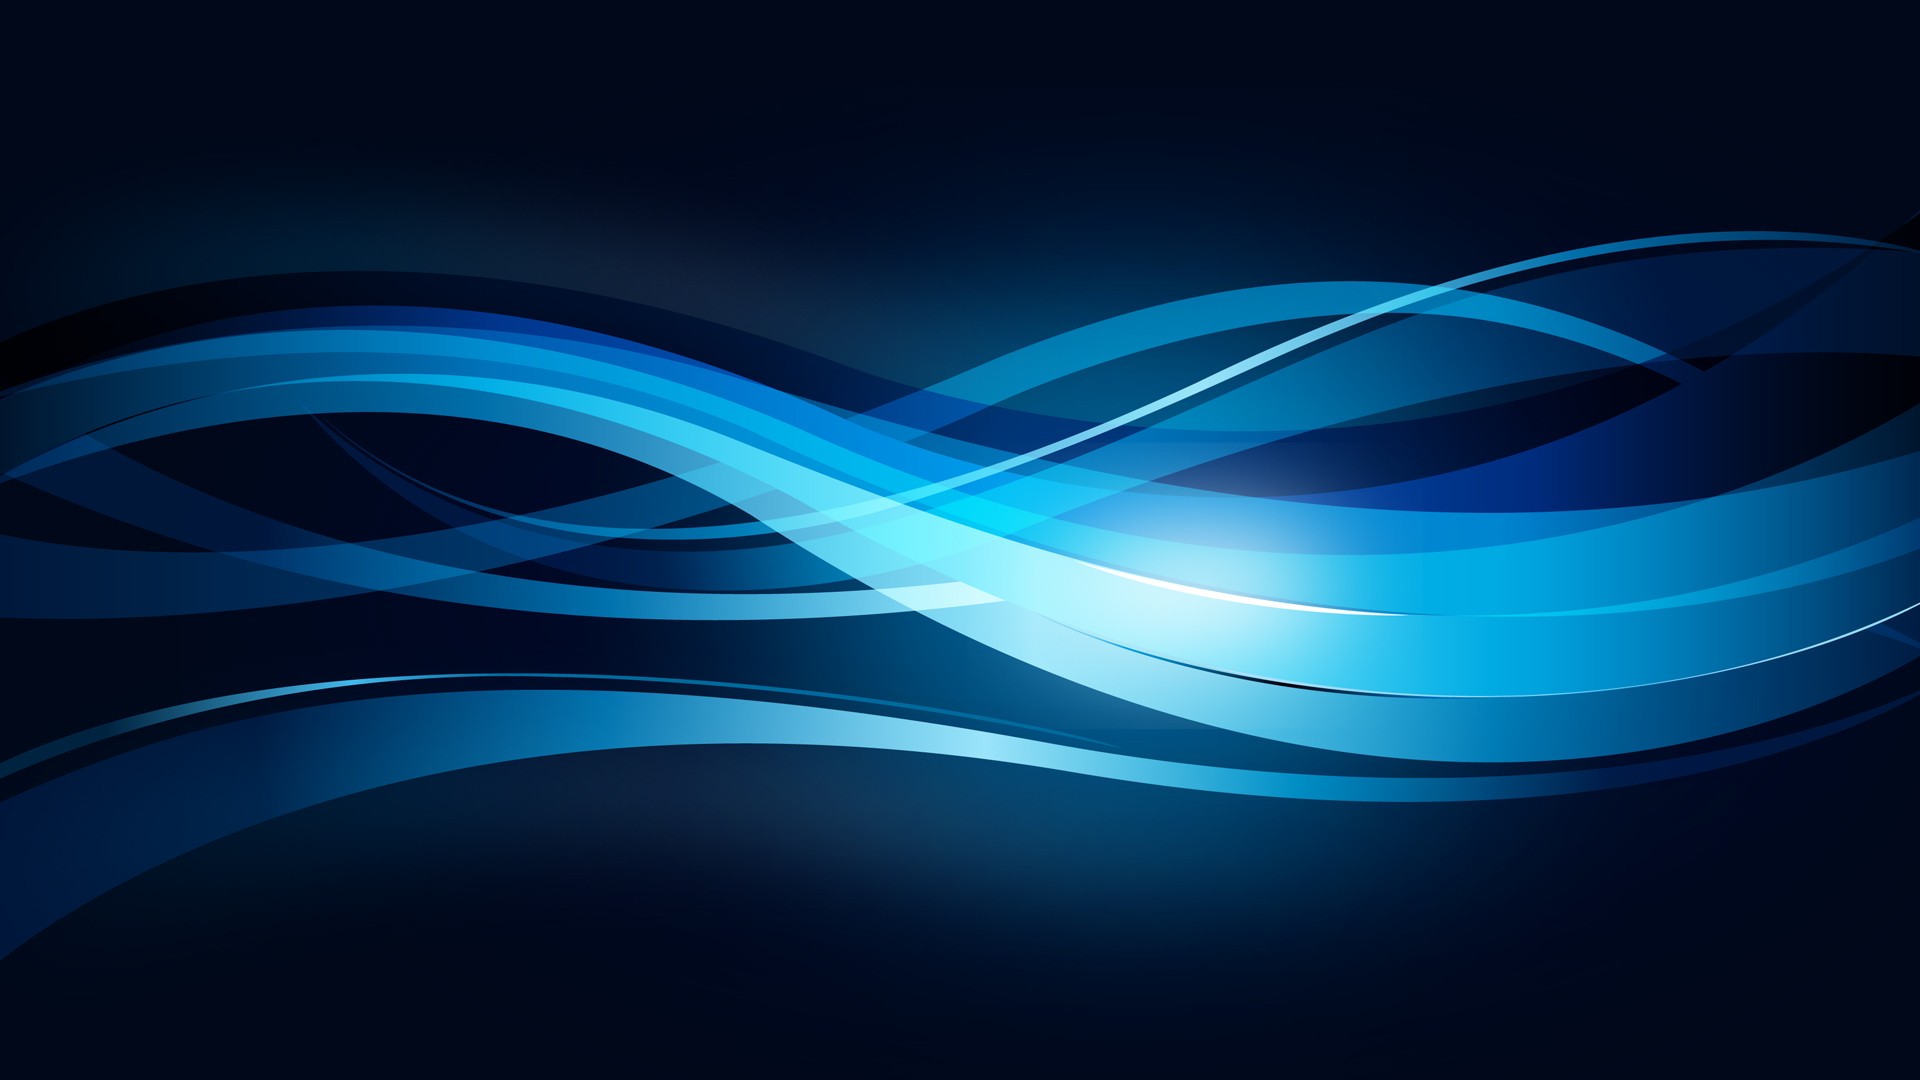 Wavy Lines Abstract Blue Cyan 1920x1080